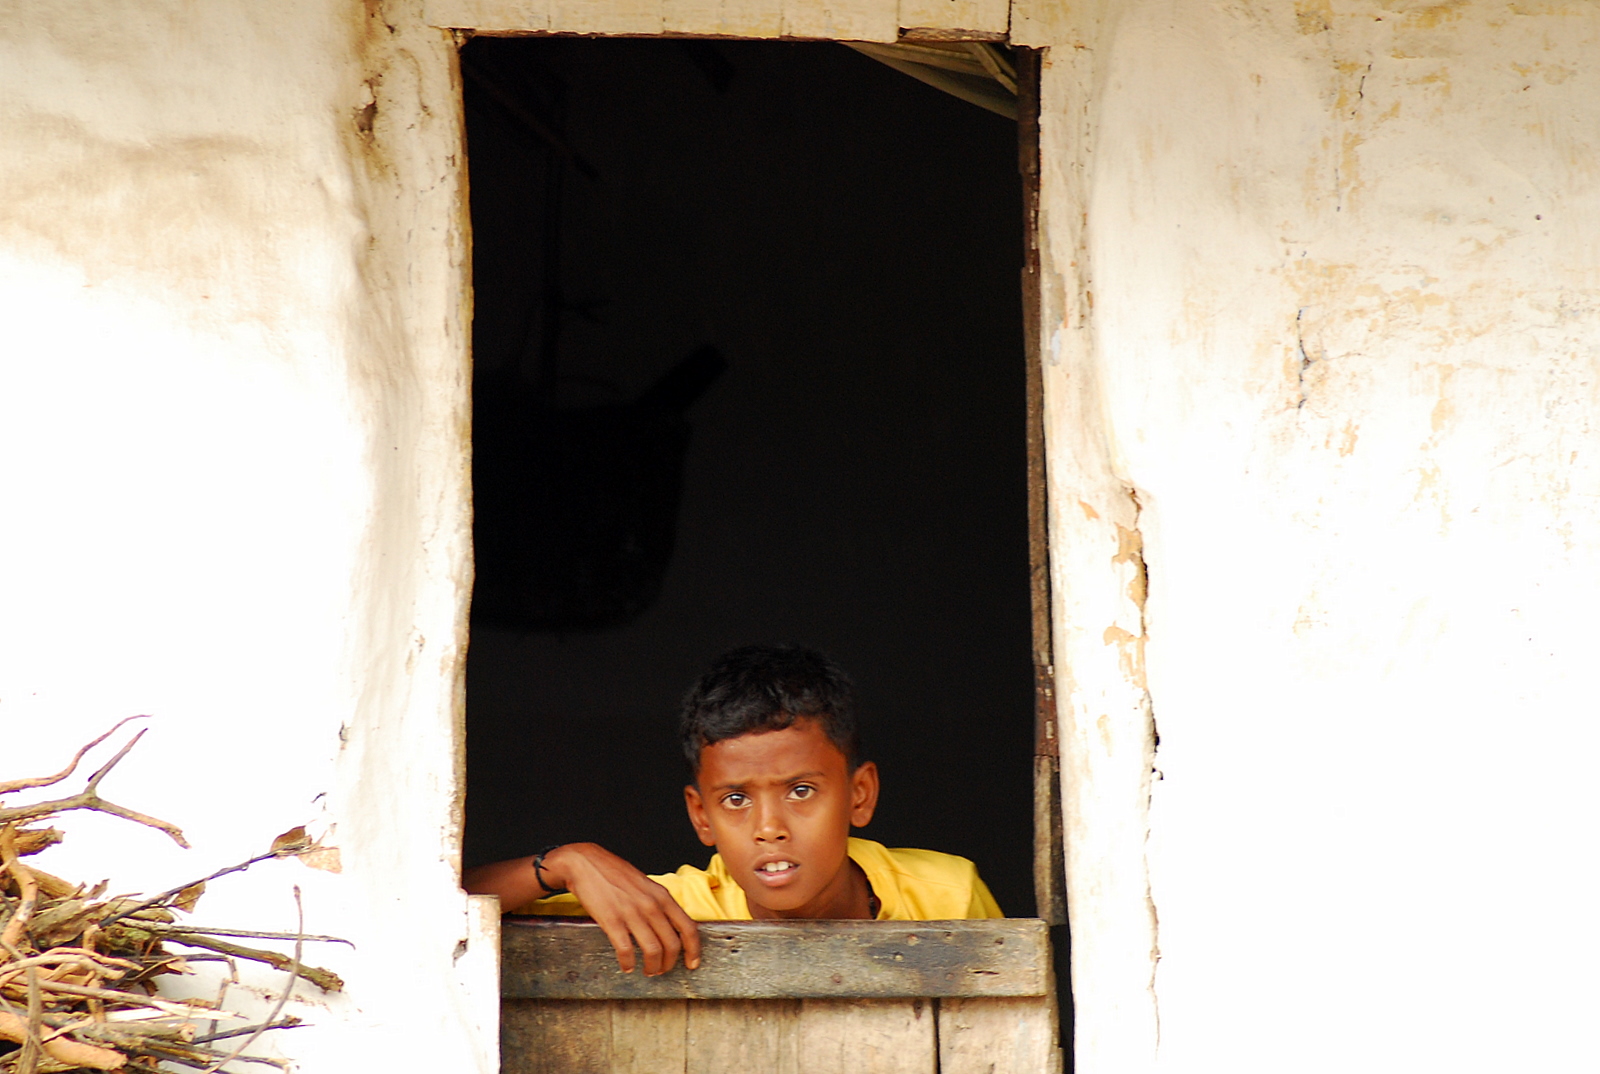 a boy wearing a yellow shirt looks out a window at the camera